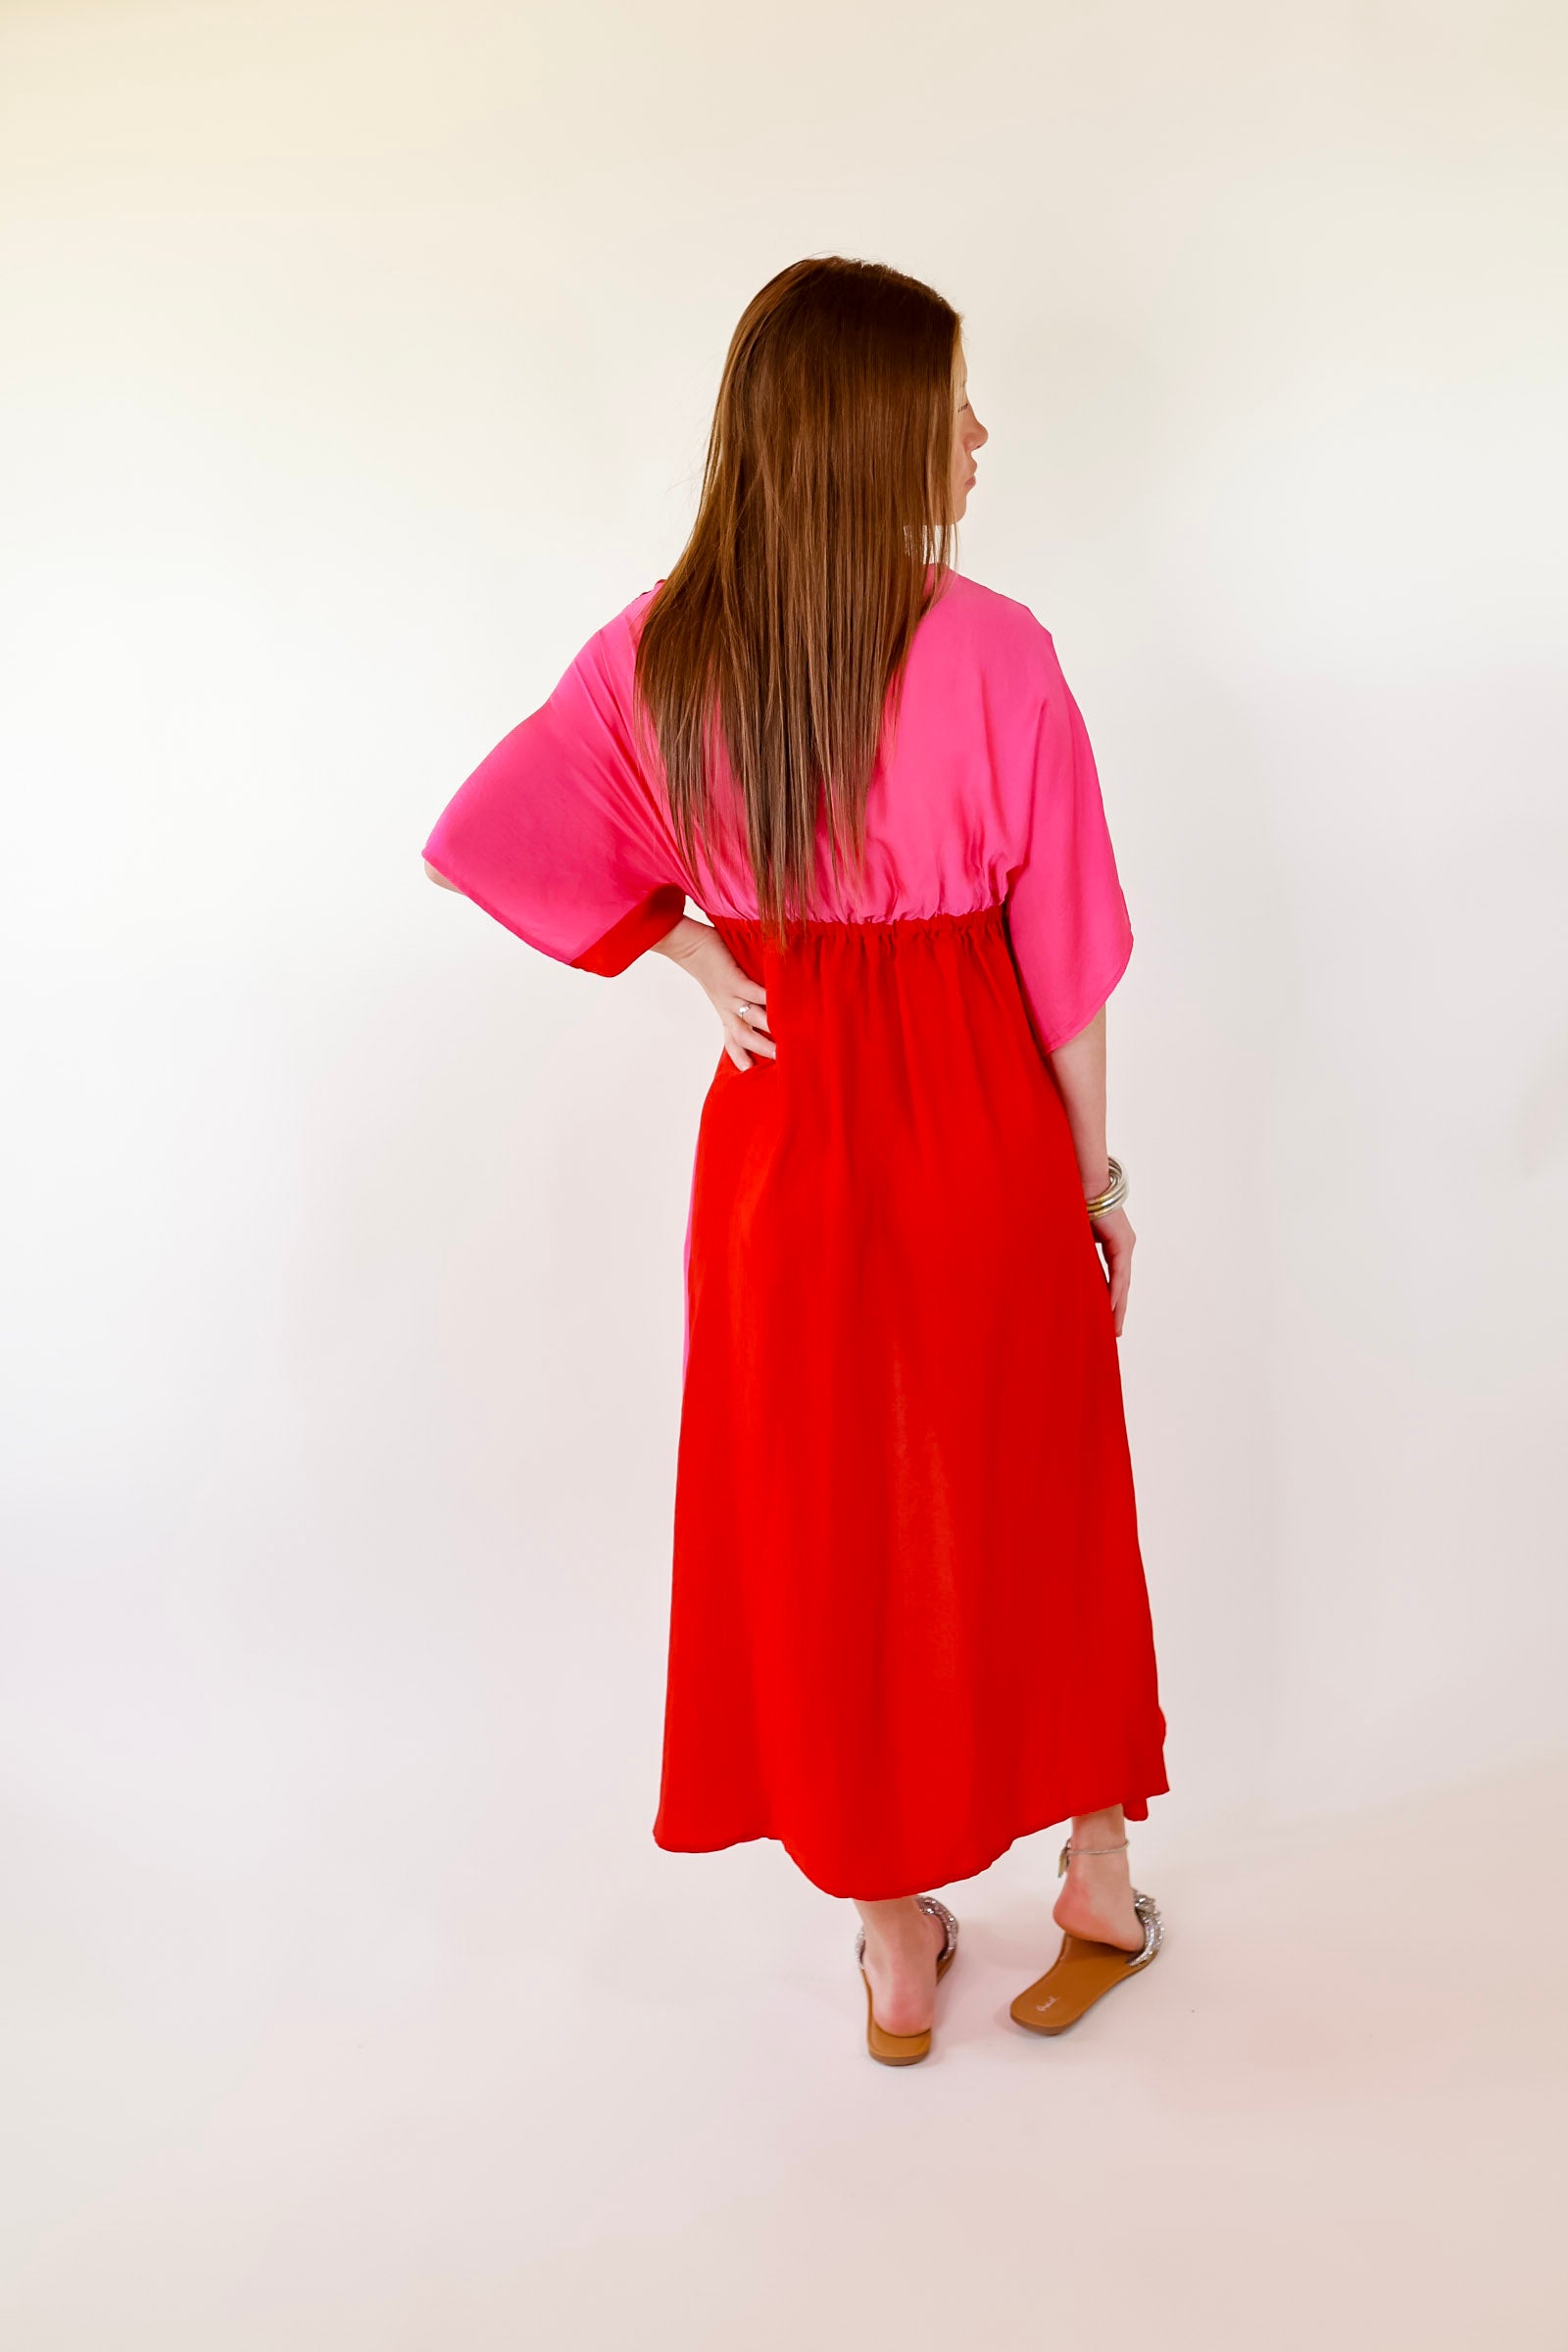 Take My Breath Away Front Knot Color Block Midi Dress in Red and Pink - Giddy Up Glamour Boutique